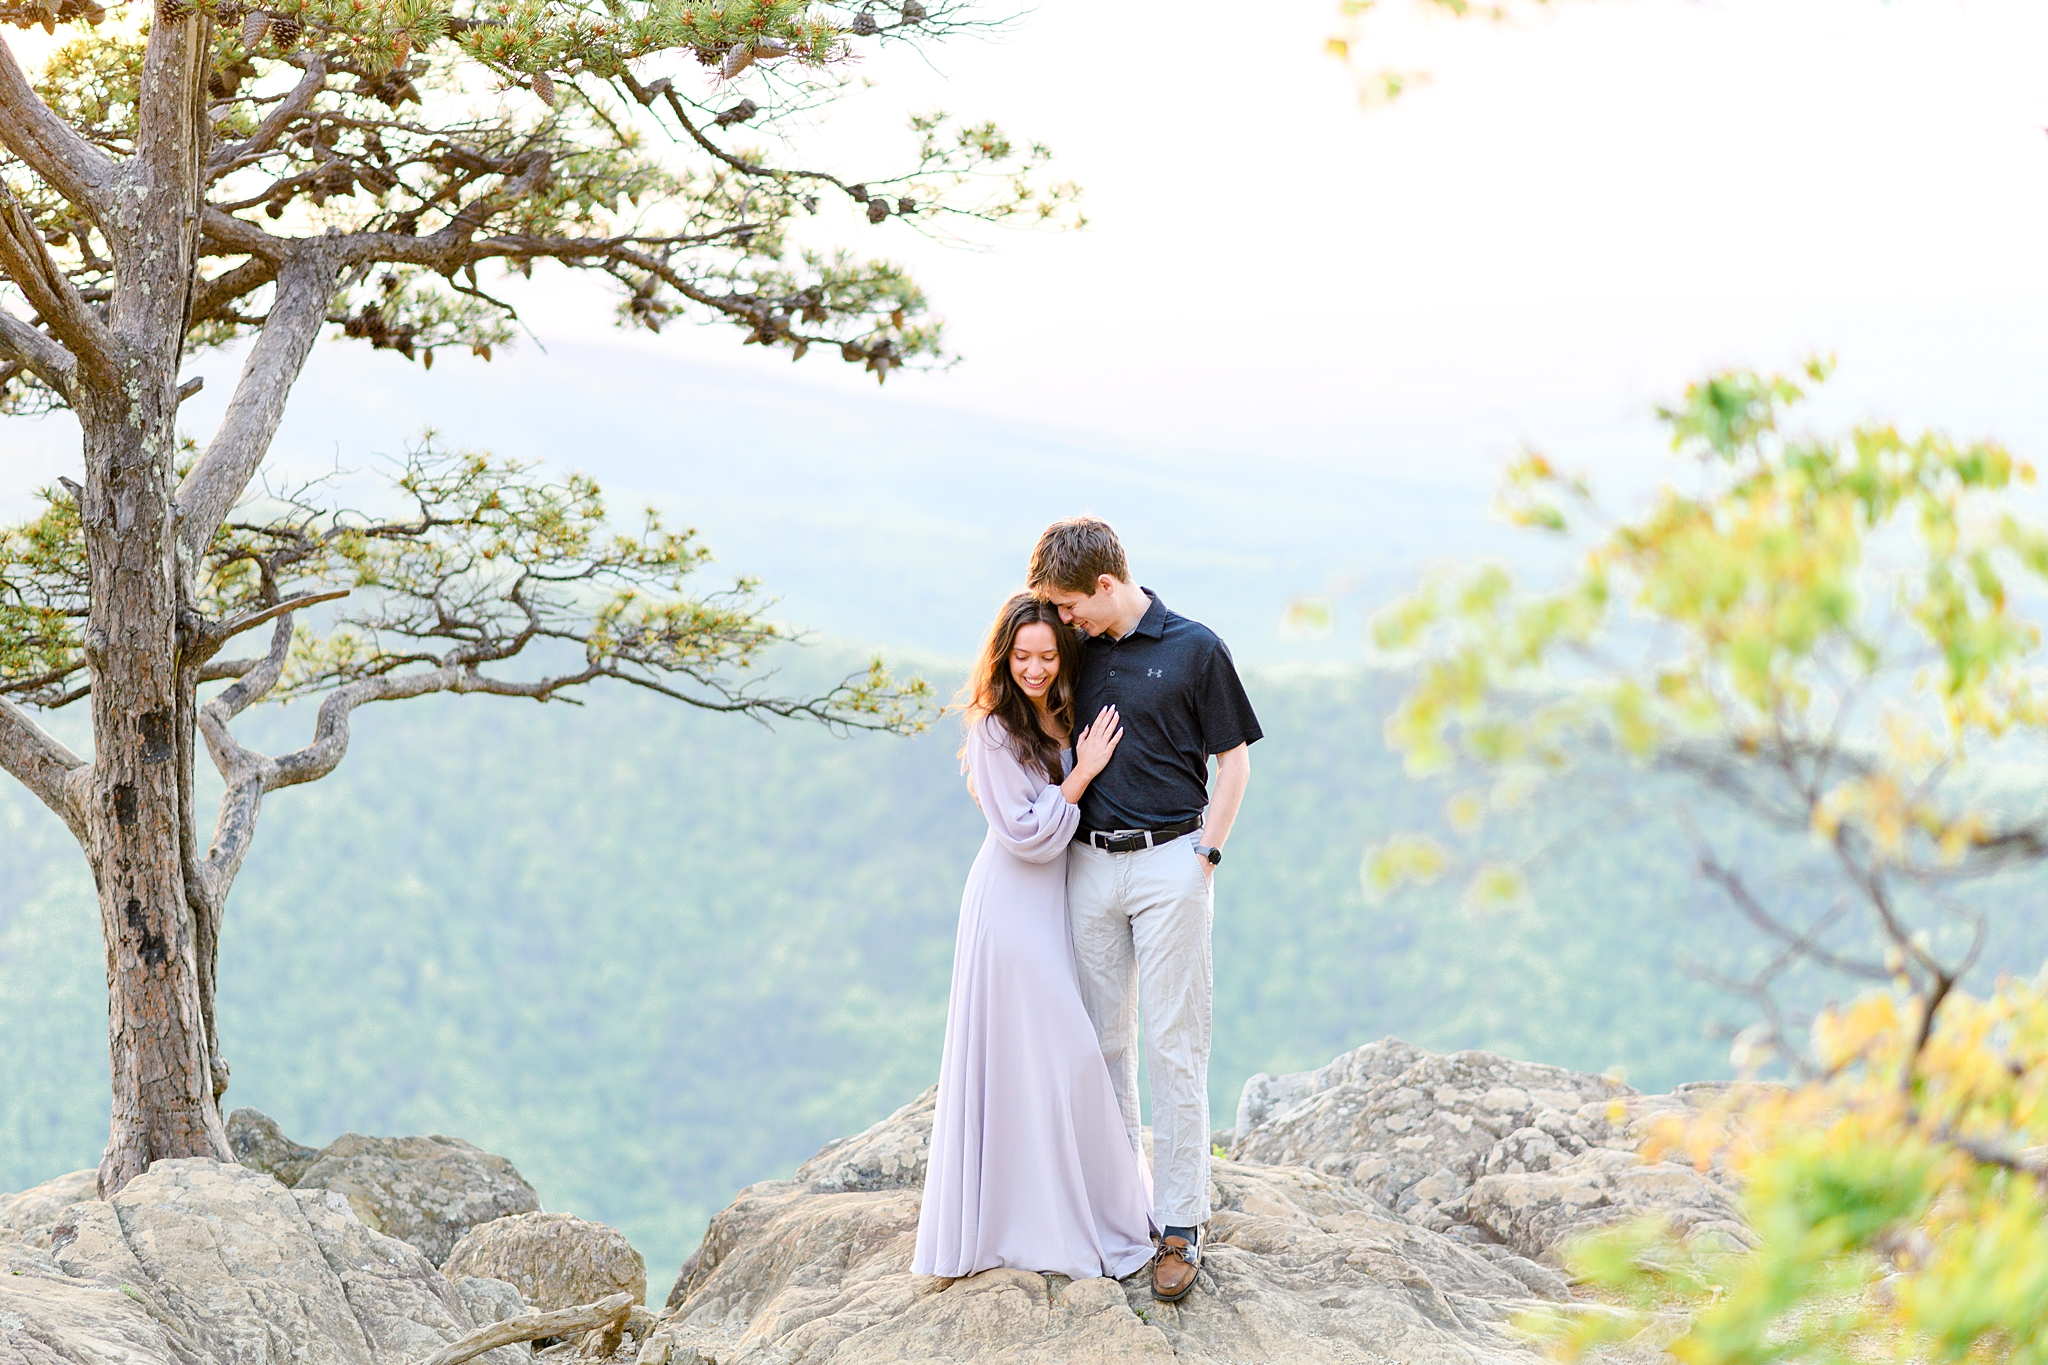 An intimate moment shared by the engaged couple surrounded by nature's beauty.